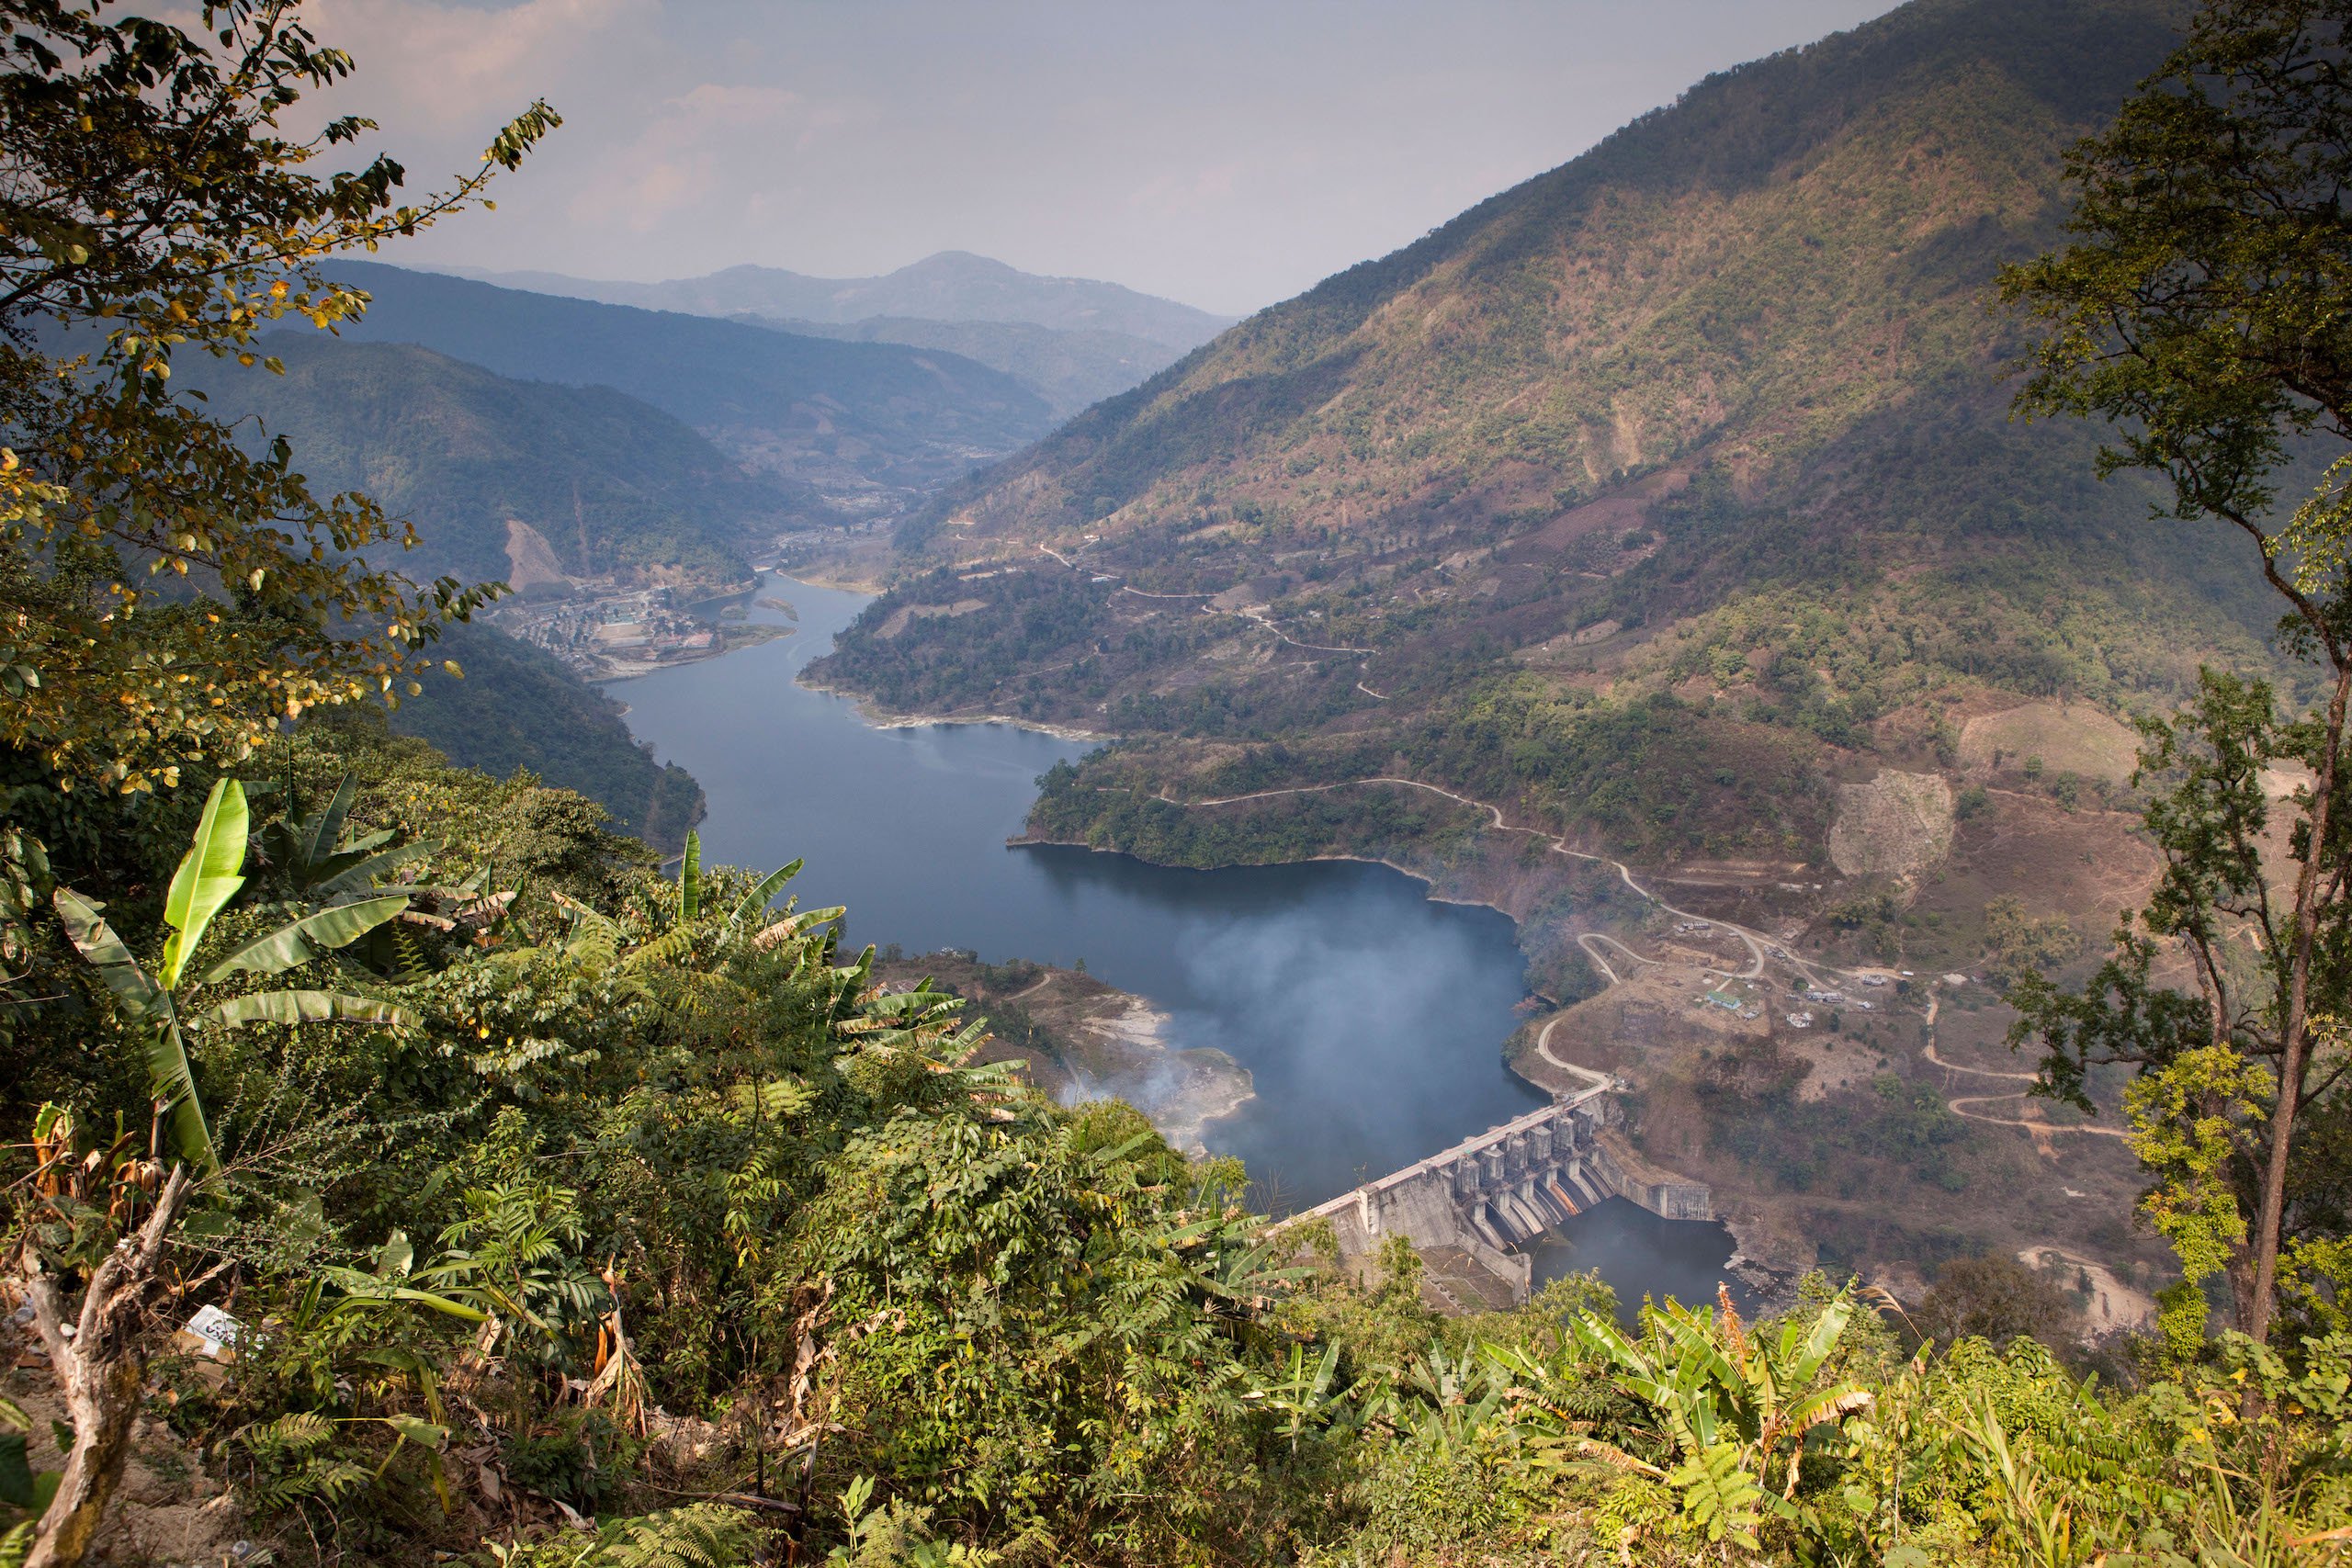 <p>The Ranganadi dam in Arunachal Pradesh. In February 2019 the dam released an unprecedented amount of silt, with severe impacts for the river’s biodiversity and the livelihoods of people who live along its banks. (Image: Alamy)</p>